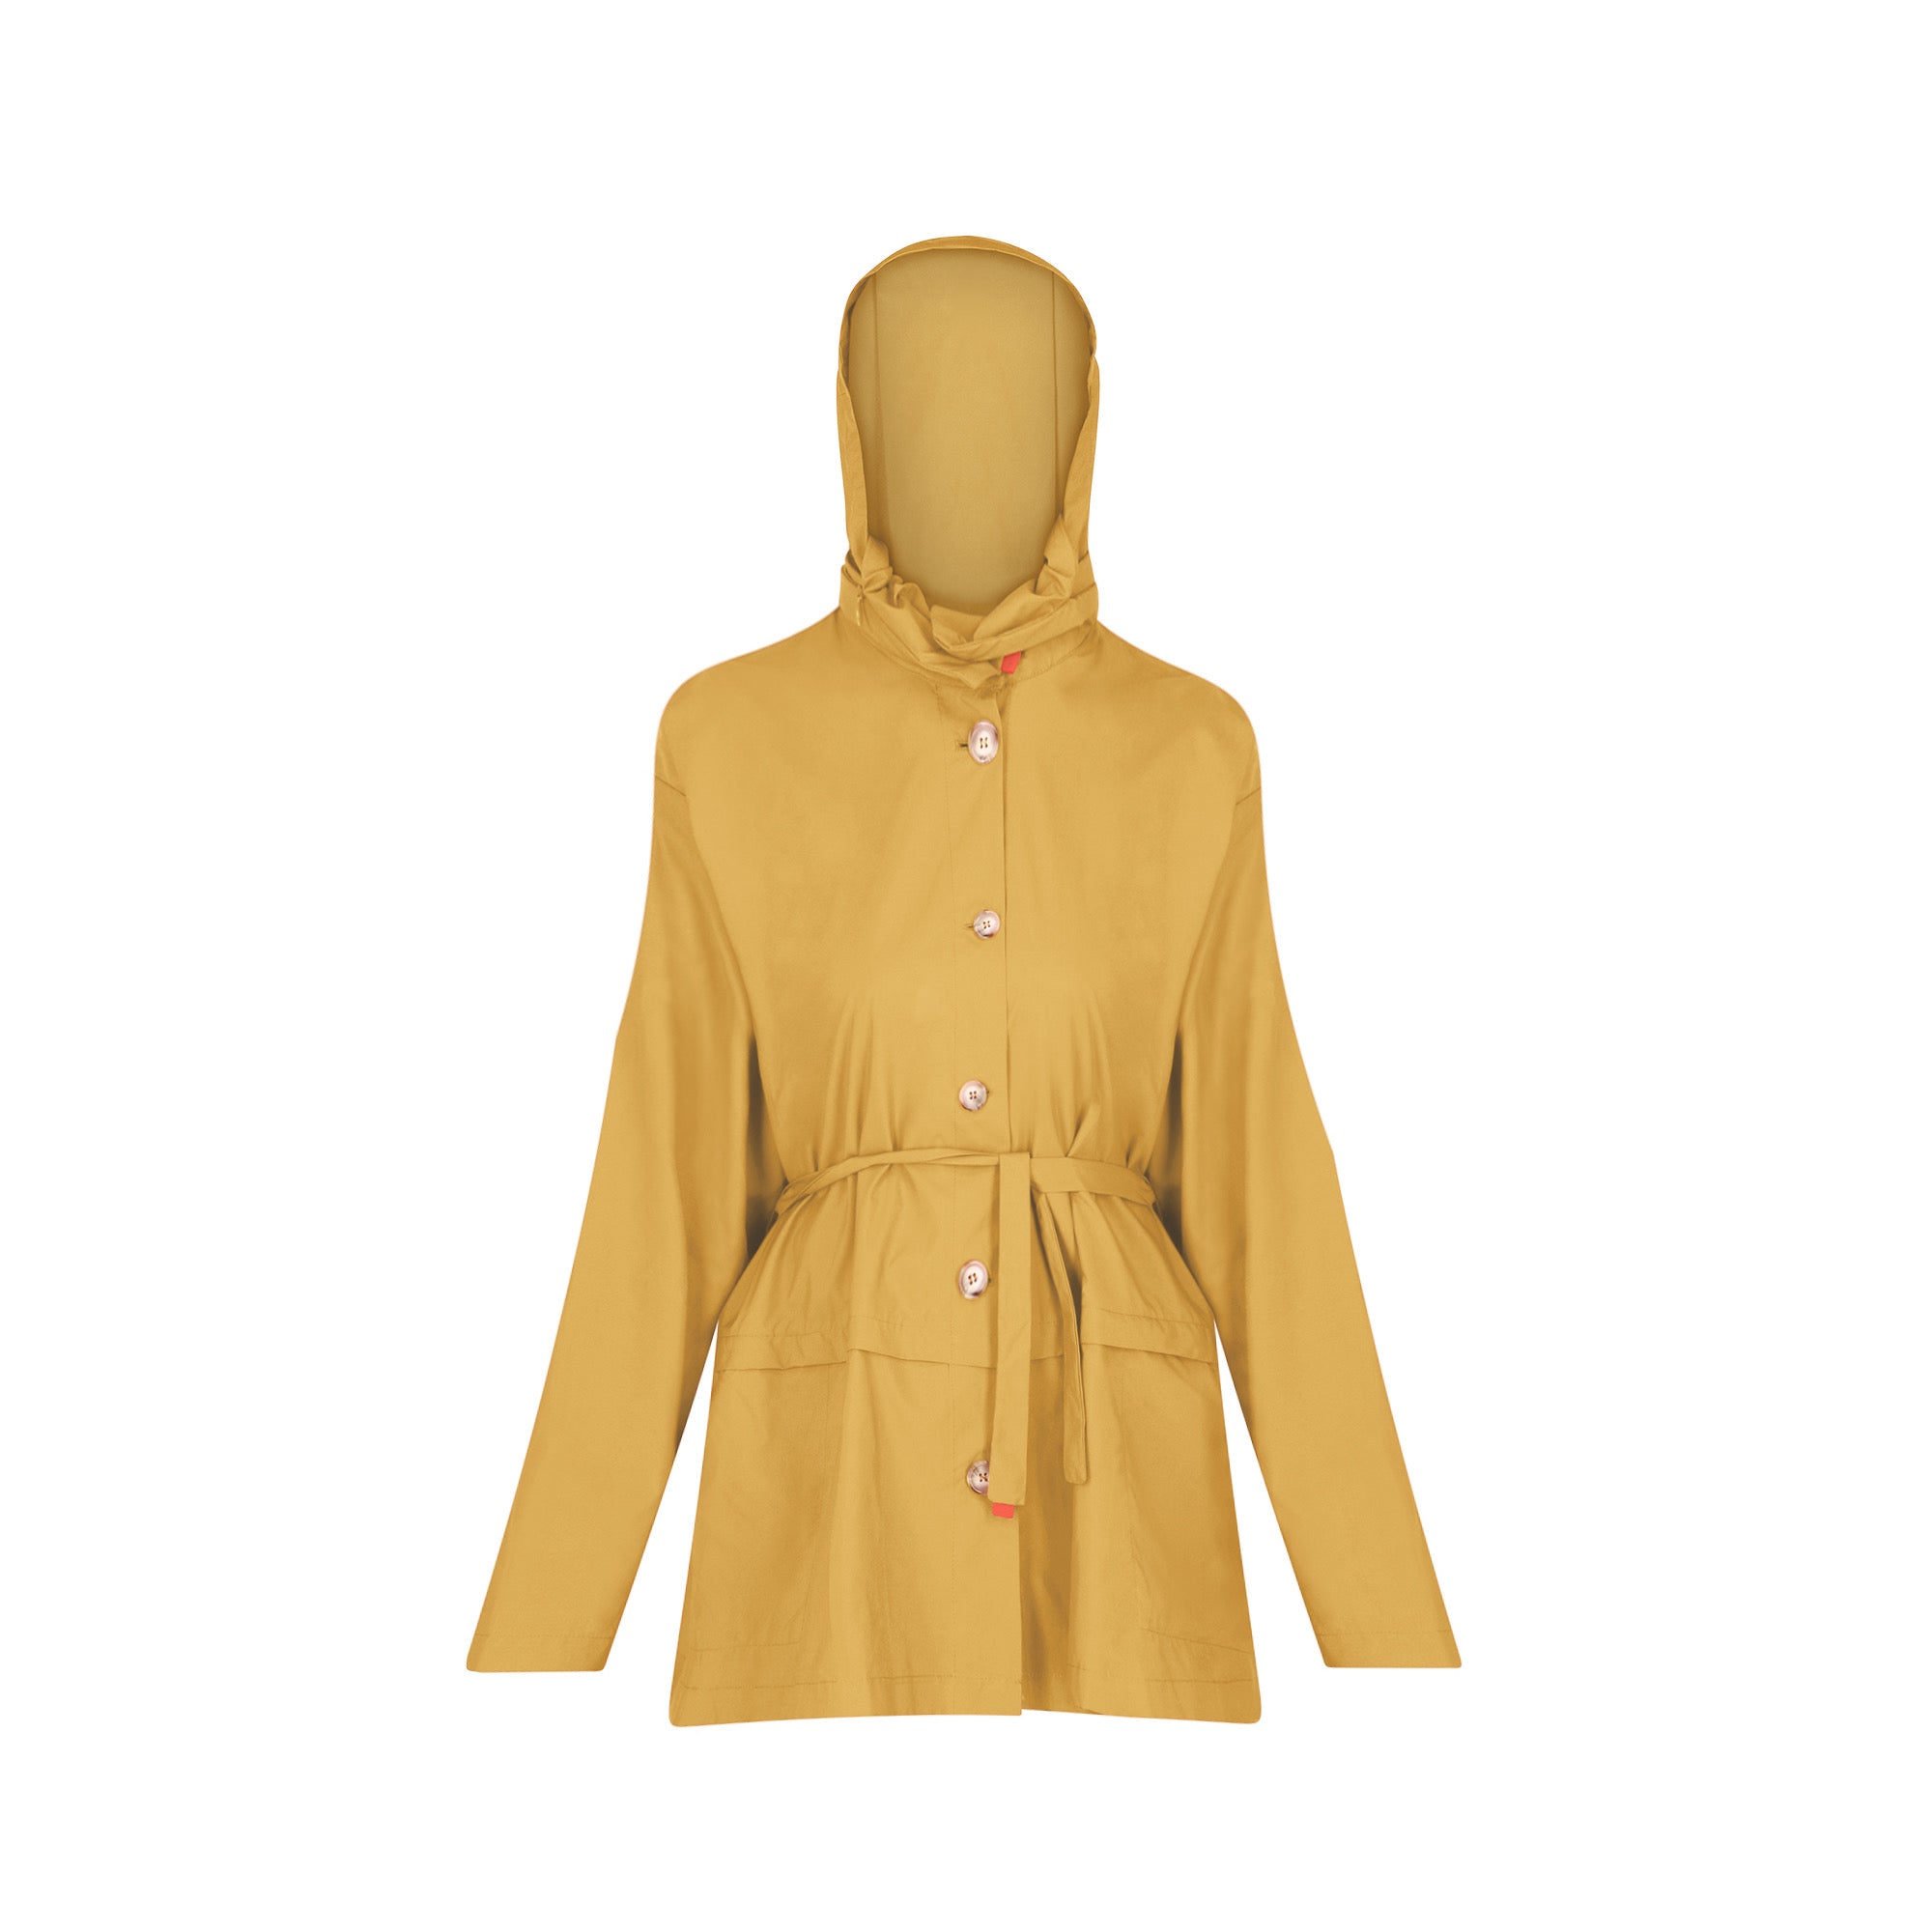 Bise raincoat - Curry color - front view